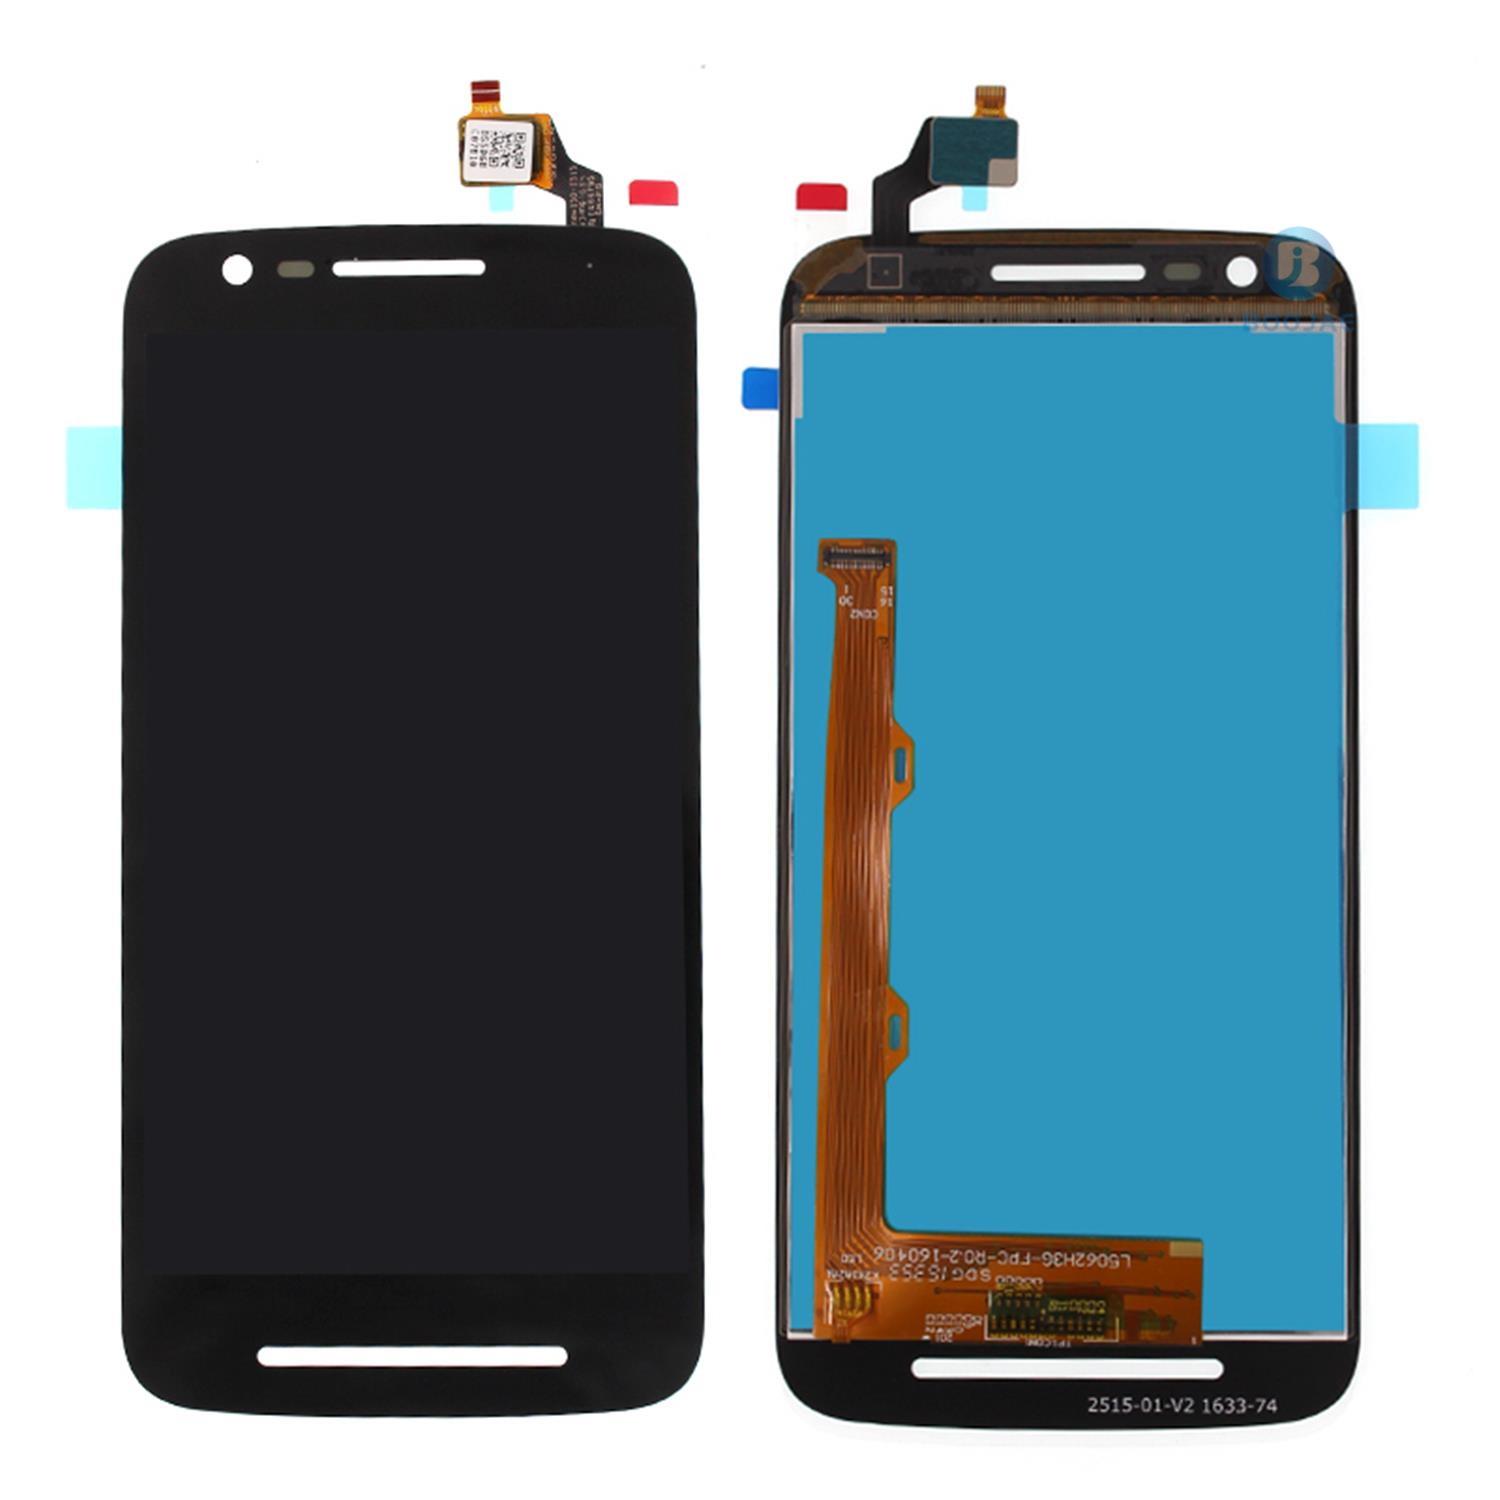 Motorola Moto E3 LCD Screen Display, Lcd Assembly Replacement